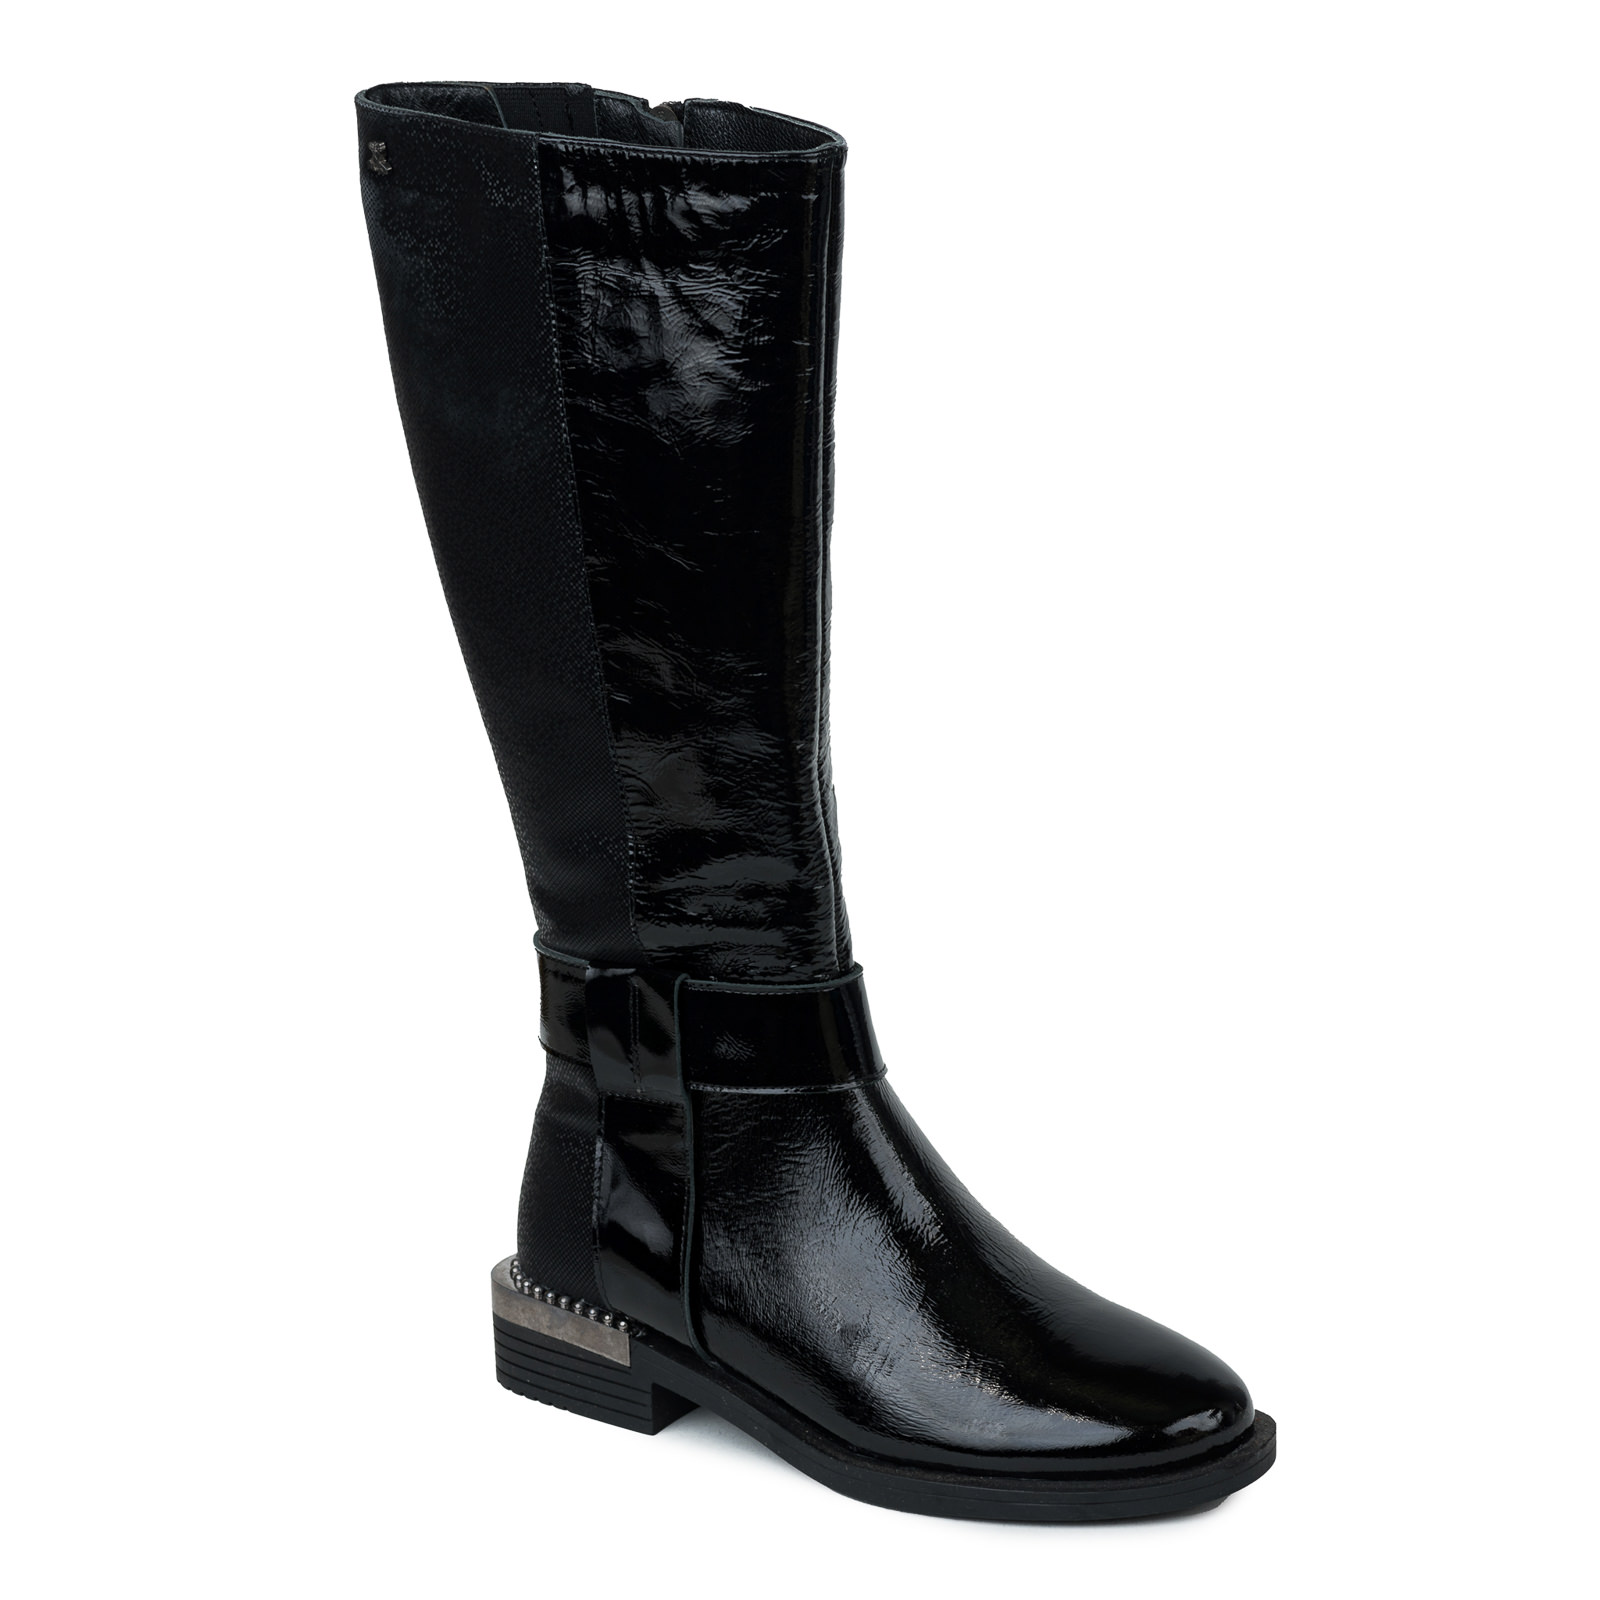 Leather boots B444 - BLACK